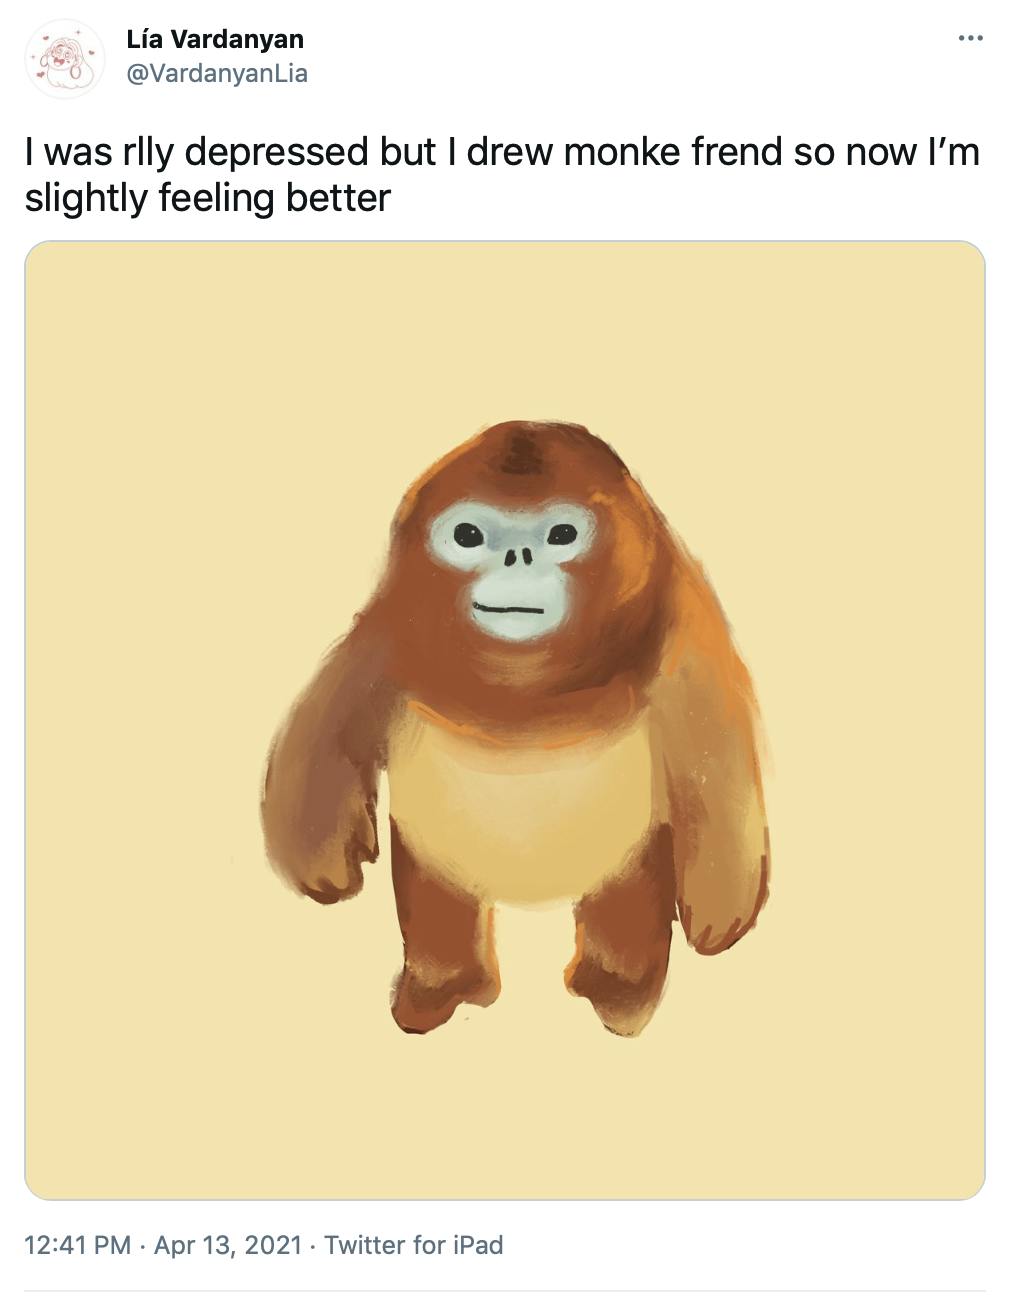 'I was rlly depressed but I drew monke frend so now I’m slightly feeling better' water colour style digital painting of the monkey